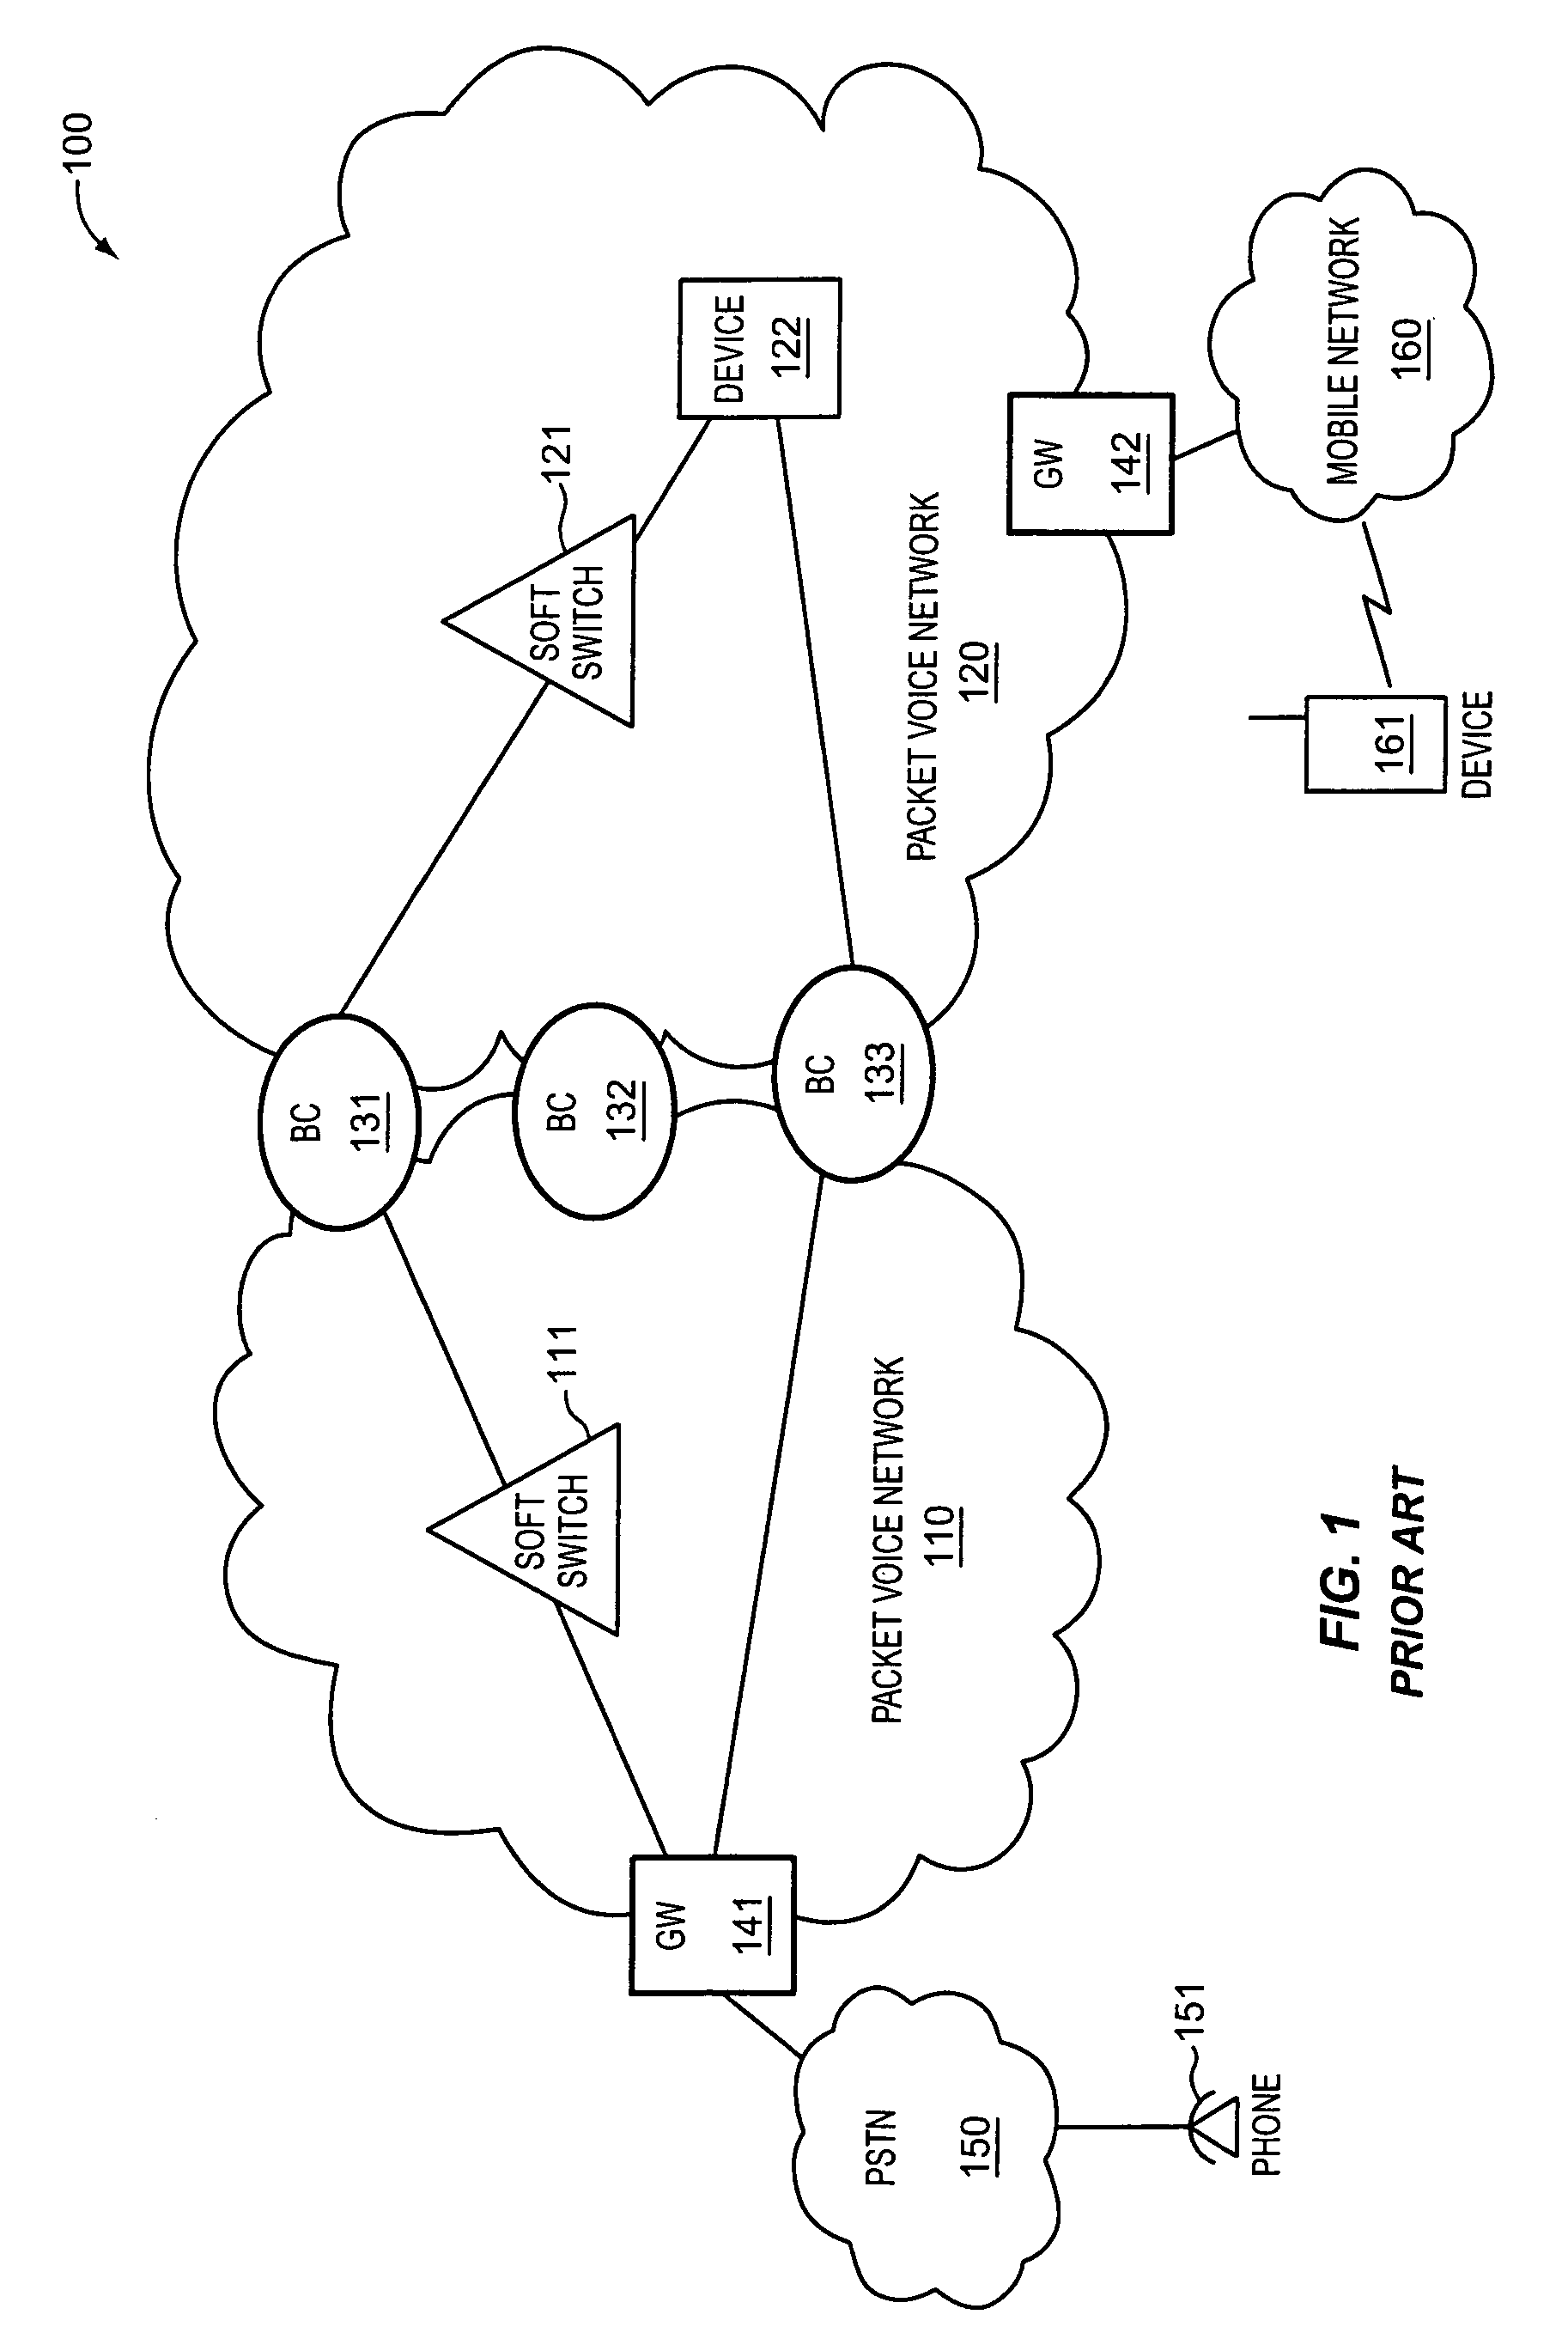 Packet voice network border control